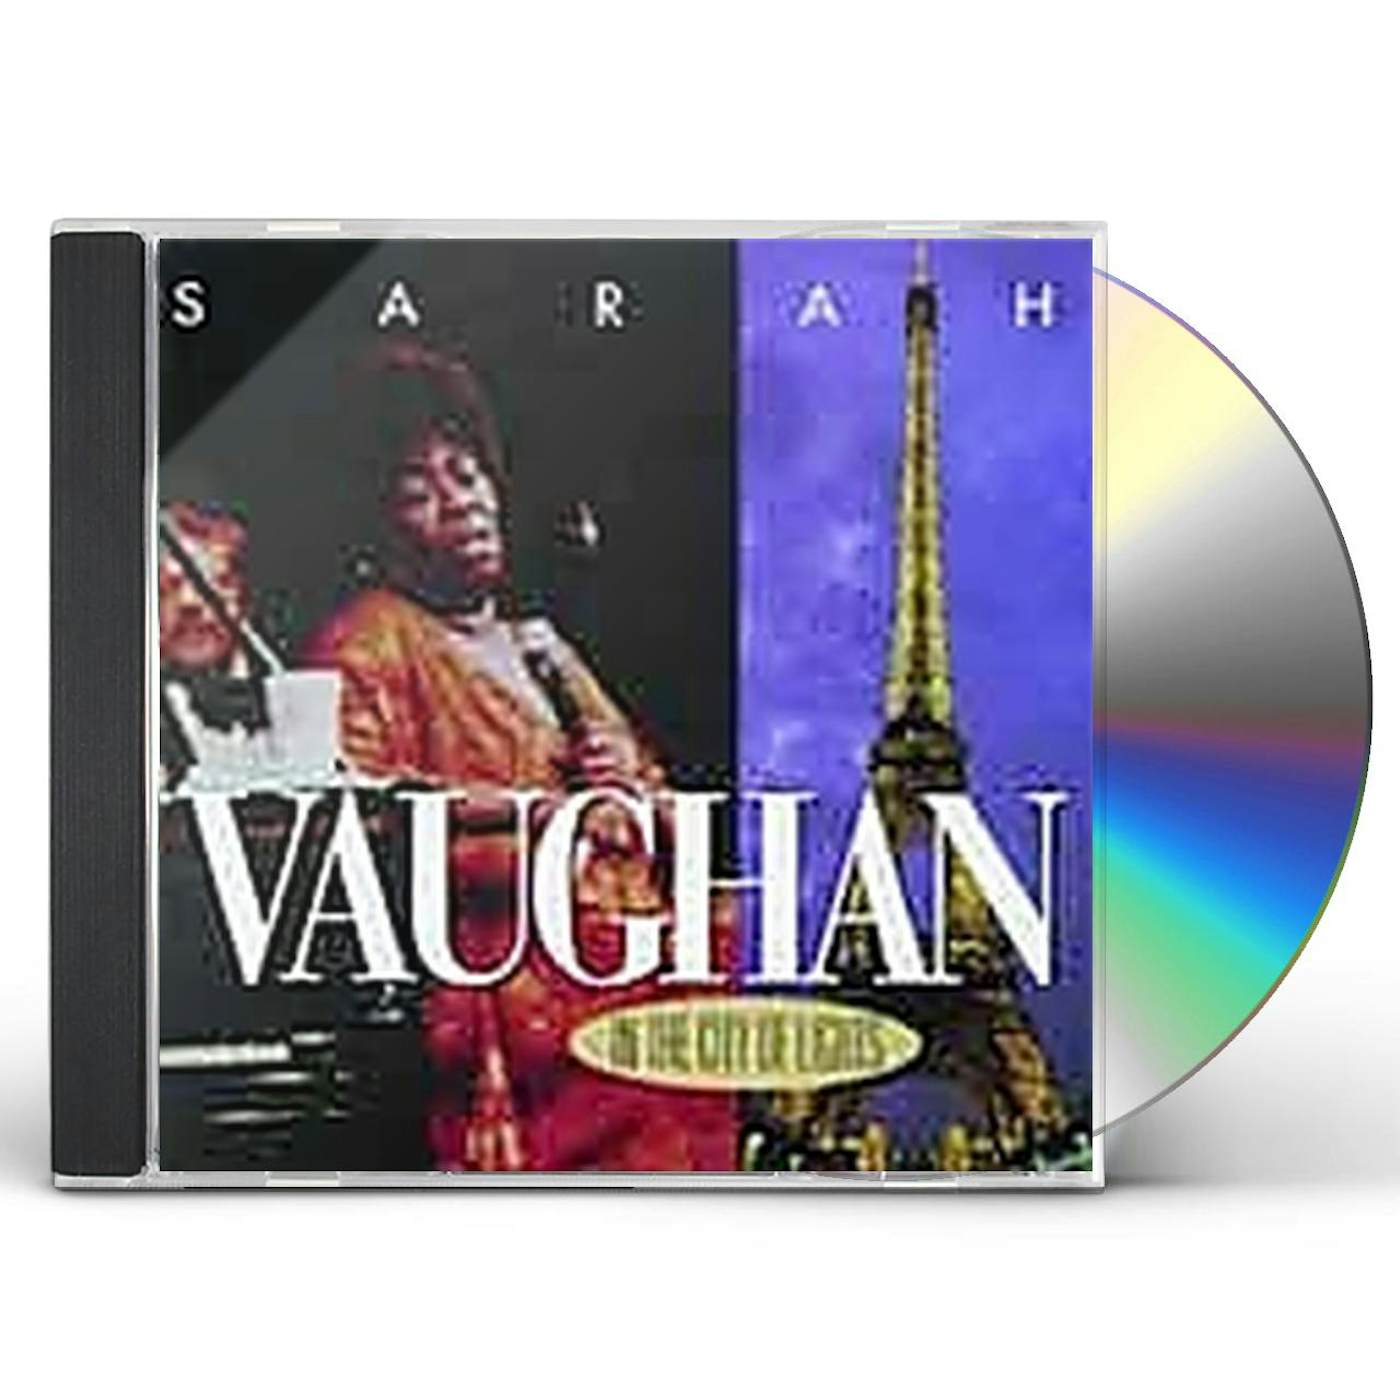 Sarah Vaughan IN THE CITY OF LIGHTS CD